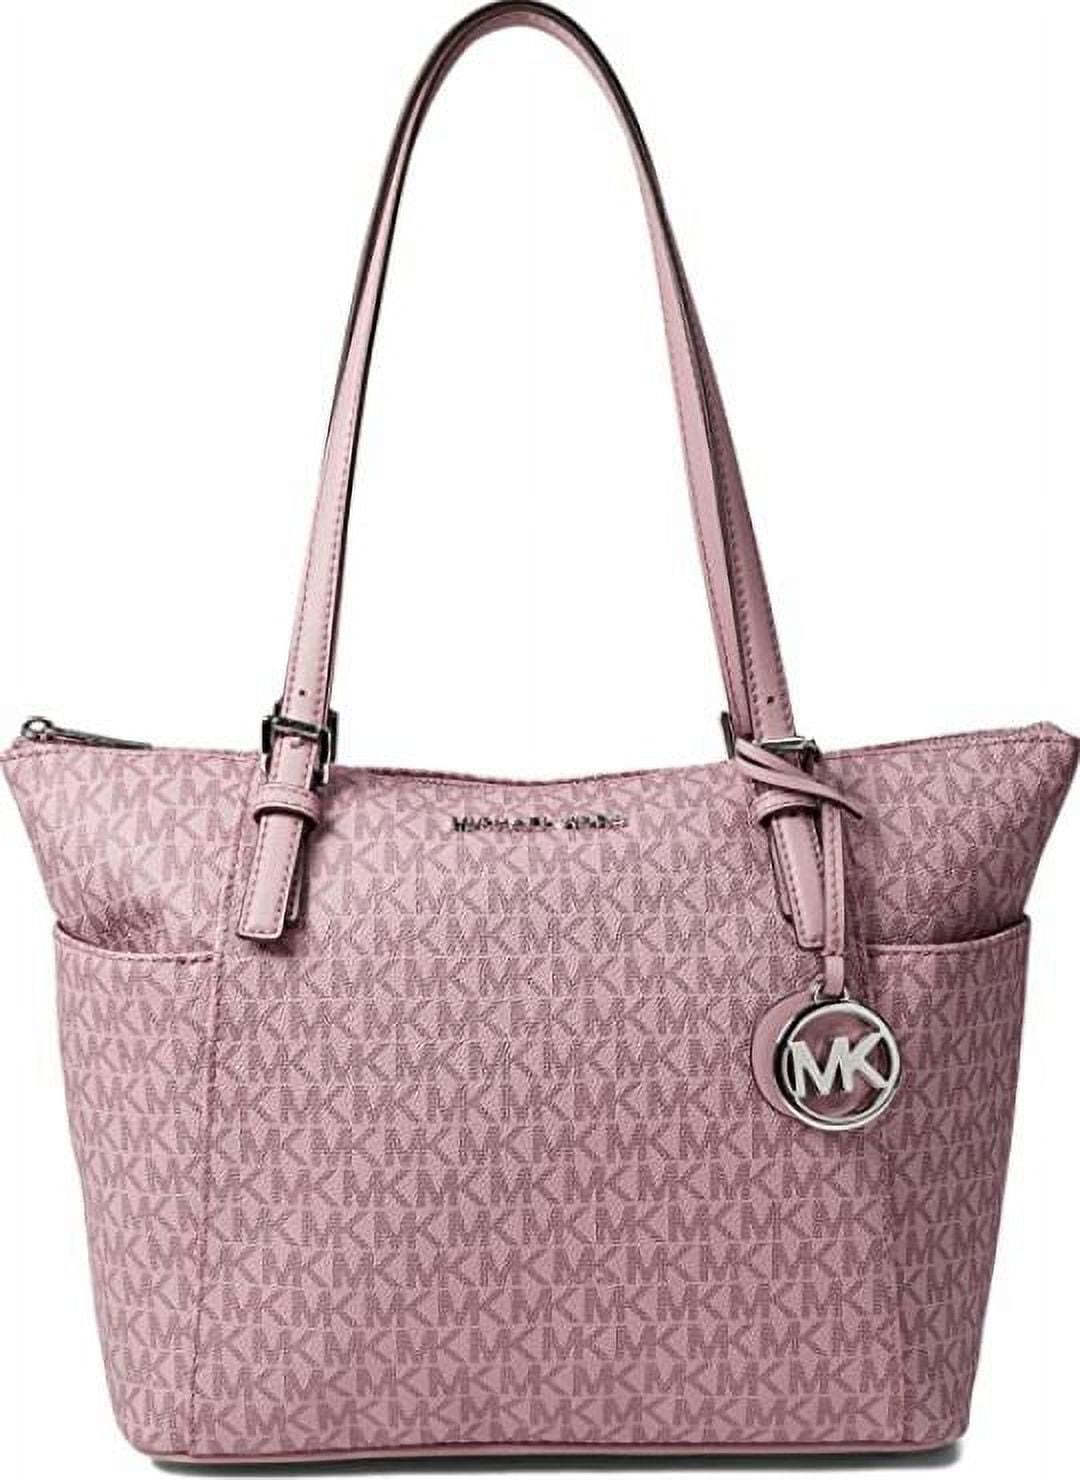 Michael Kors Marilyn Tote In Rose-Pink Leather - Women for Women